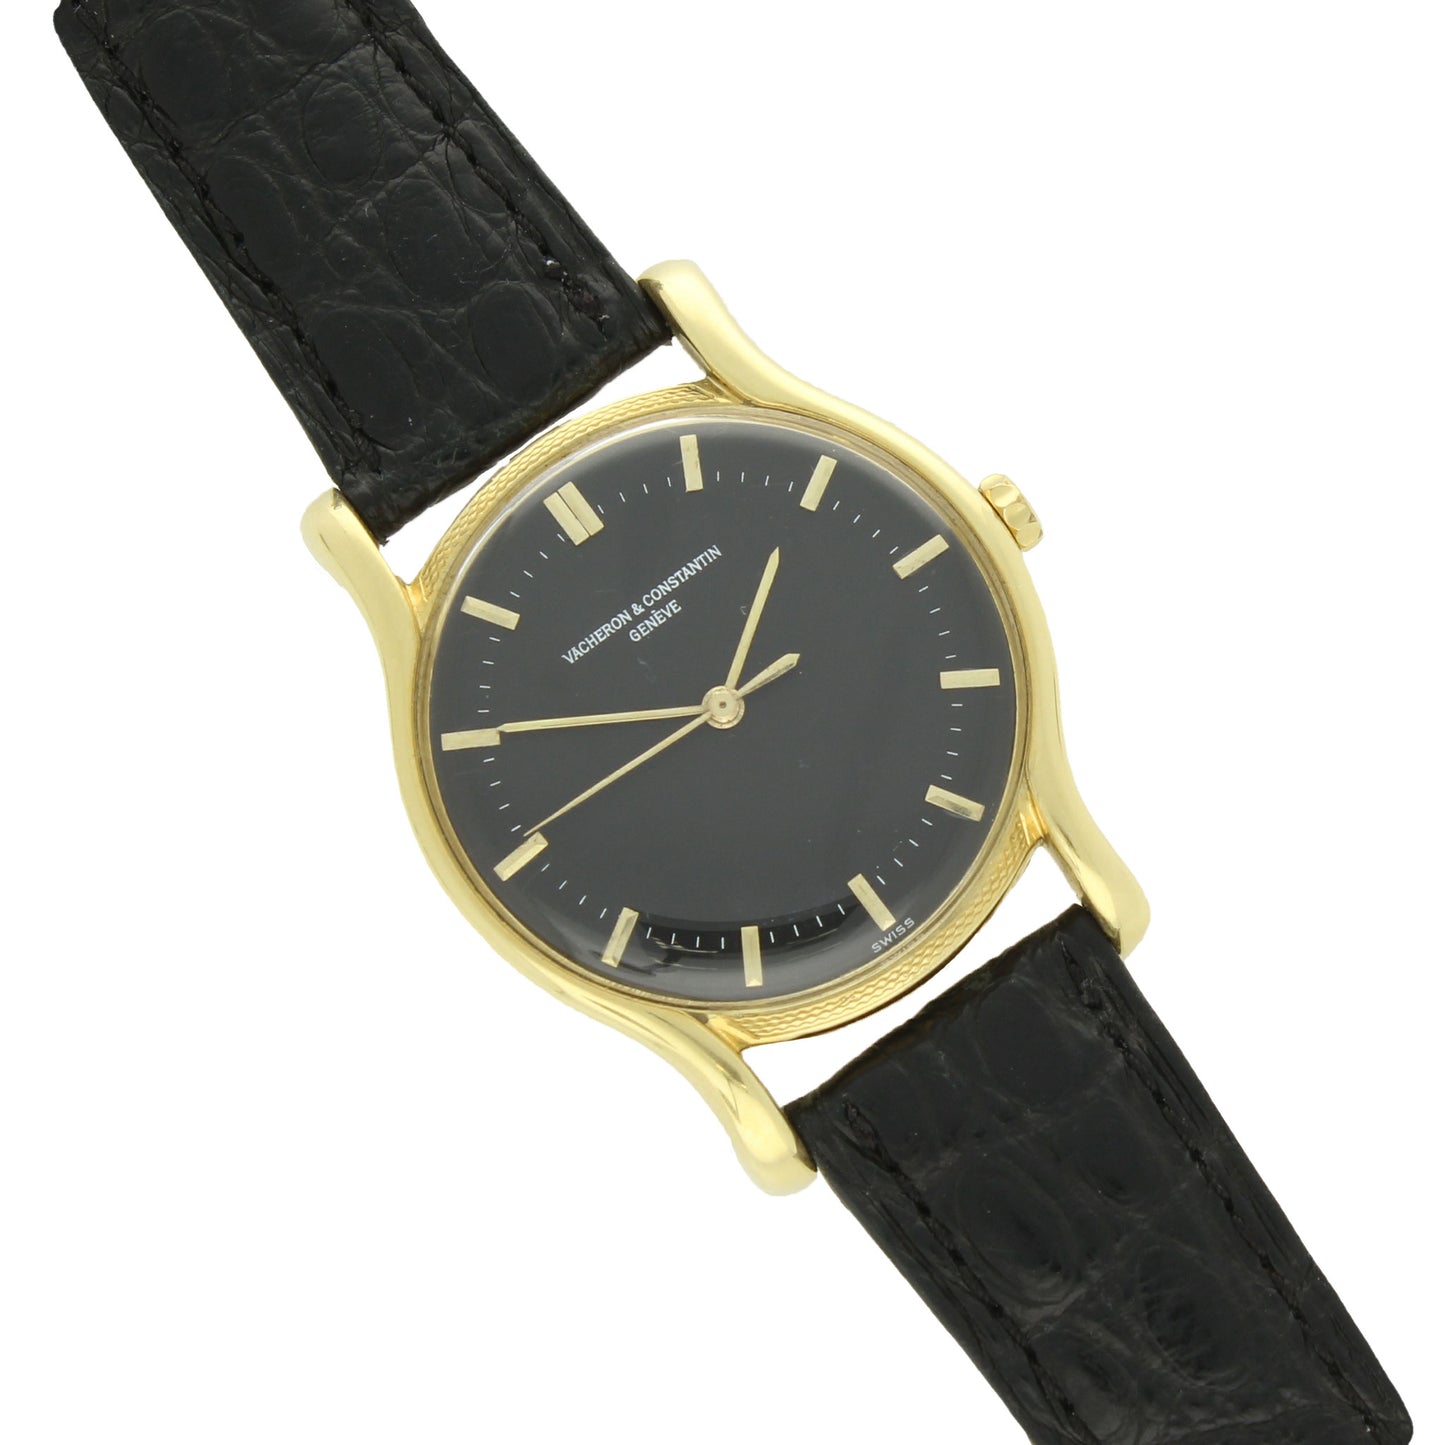 18ct yellow gold, reference 4893 wristwatch. Made 1940's